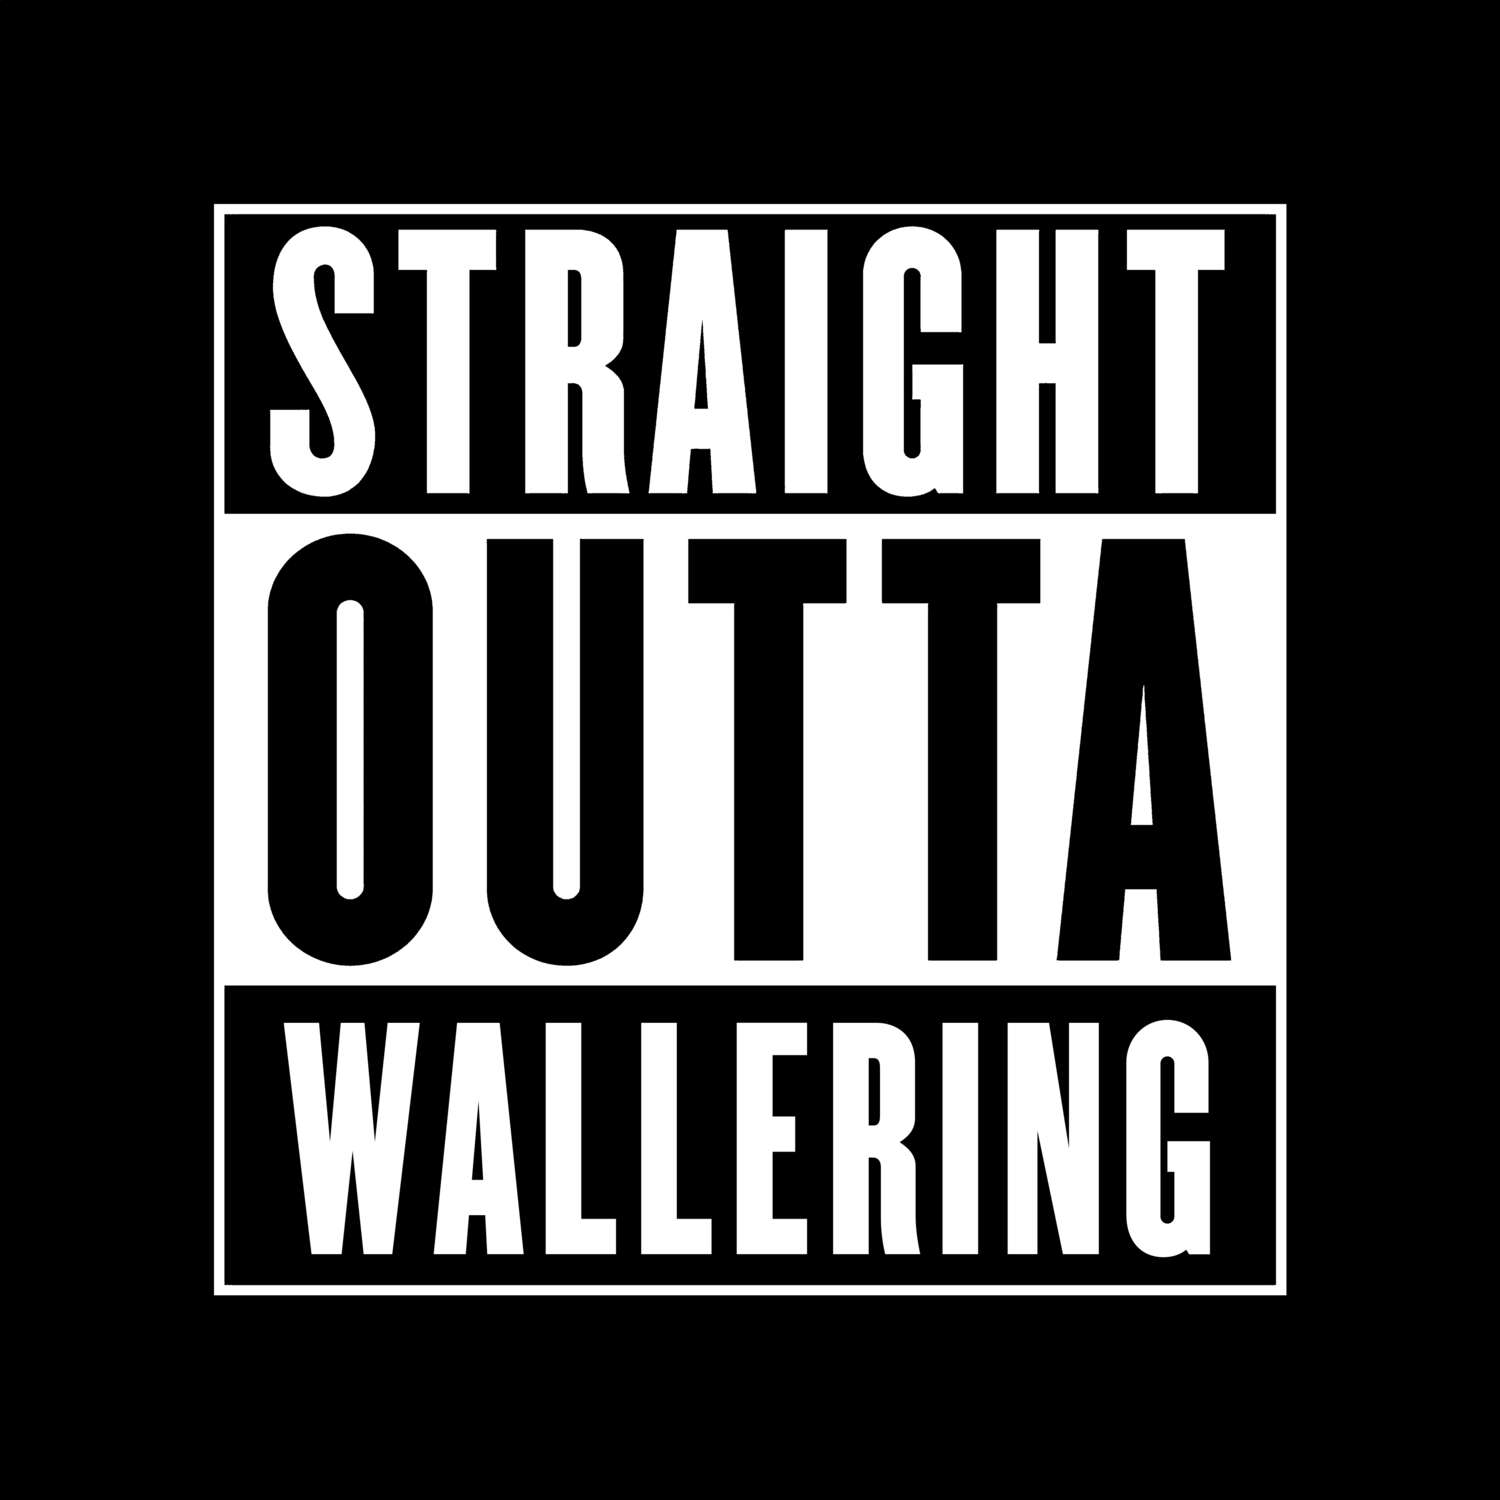 Wallering T-Shirt »Straight Outta«